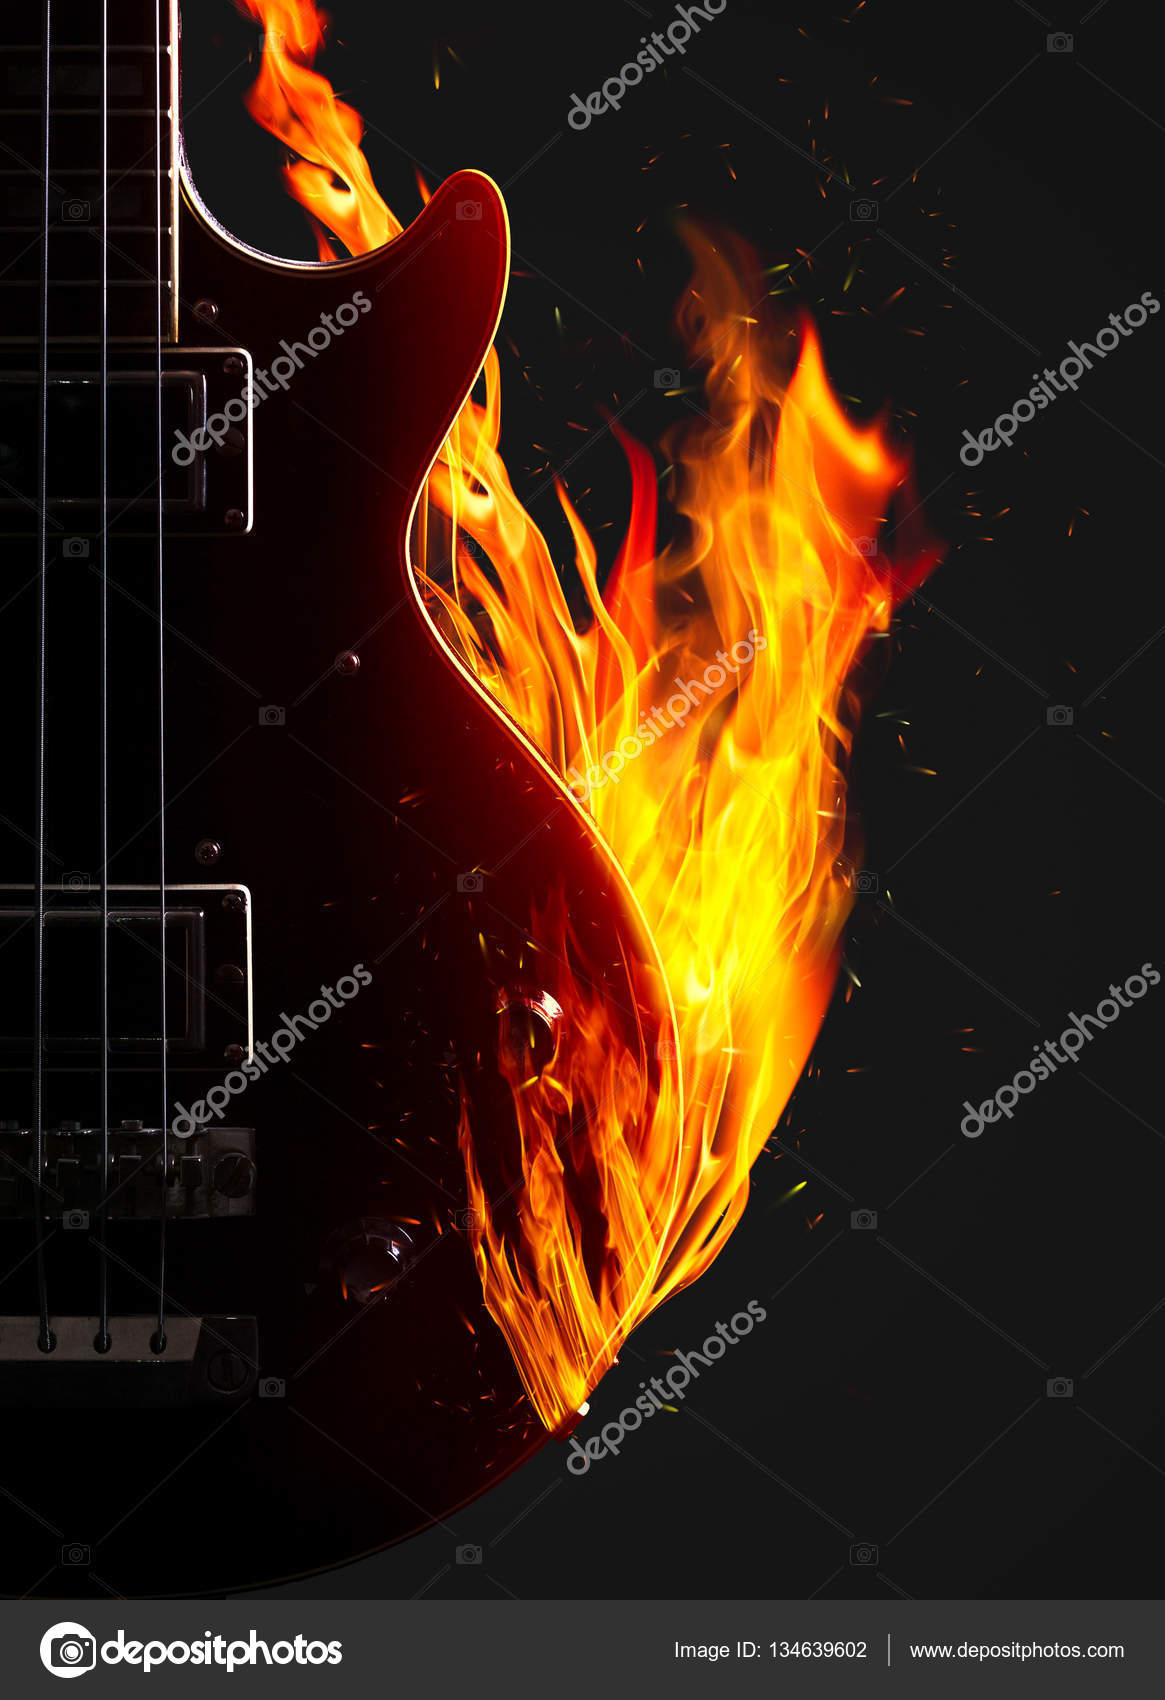 Electric Bass Guitar in the fire on Black Background Waterproof Shower Curtain 